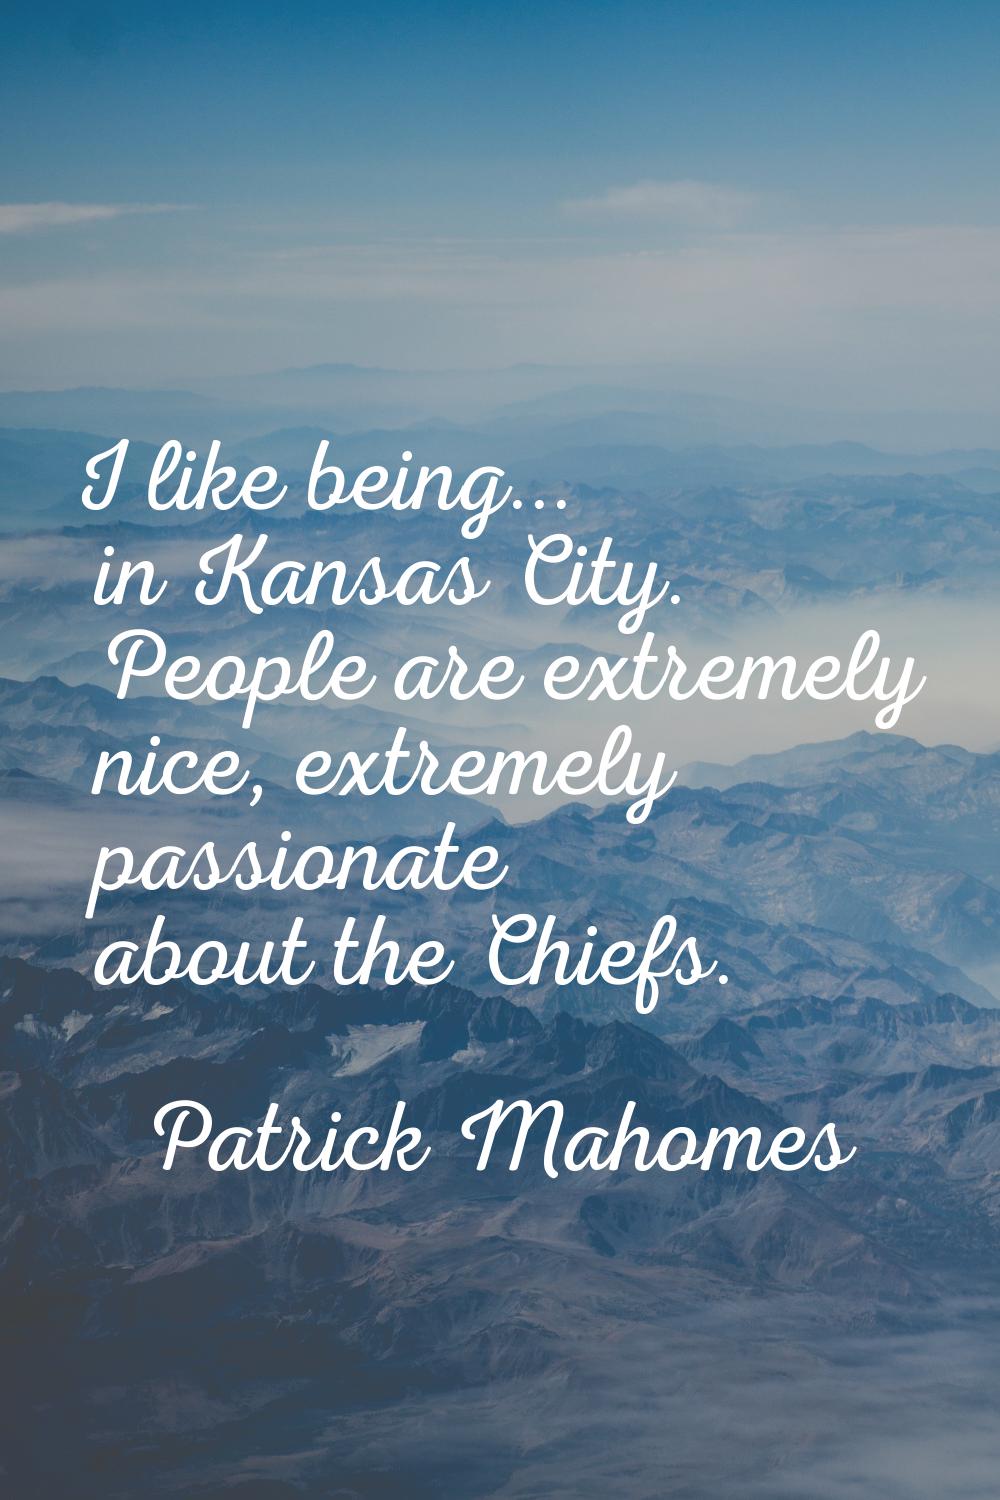 I like being... in Kansas City. People are extremely nice, extremely passionate about the Chiefs.